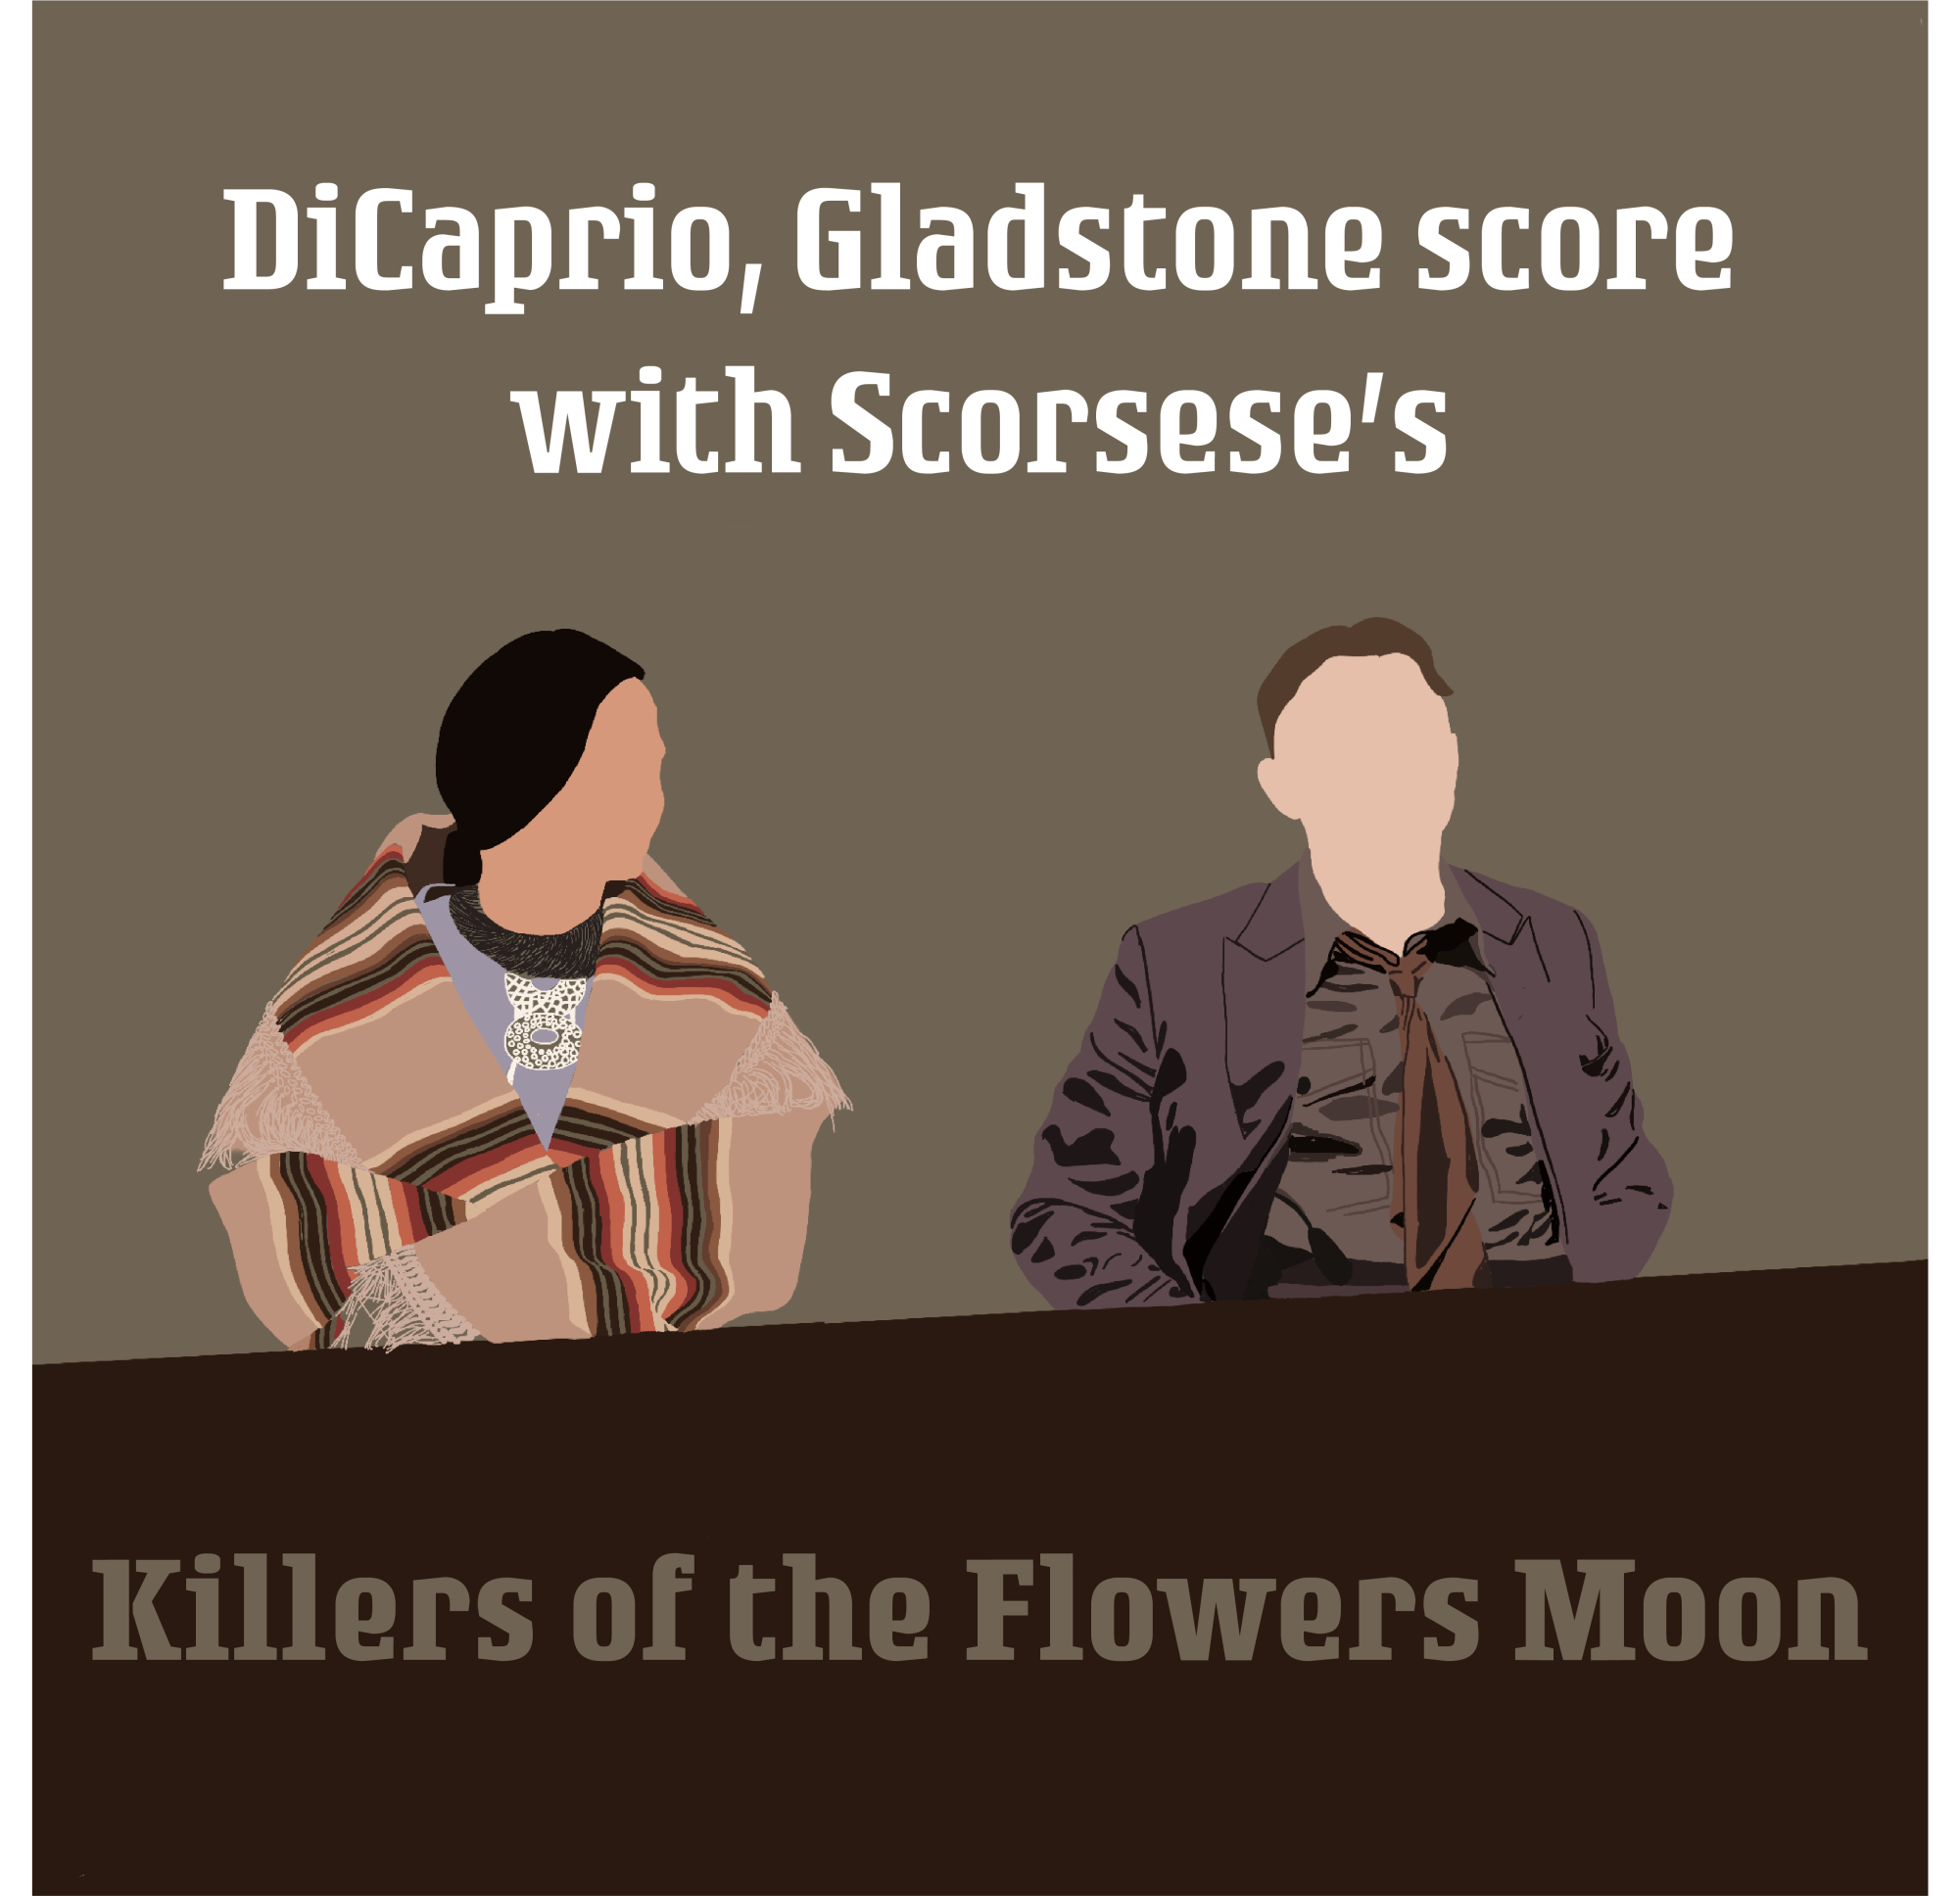 DiCaprio, Gladstone score with Scorsese’s ‘Killers of the Flower Moon’